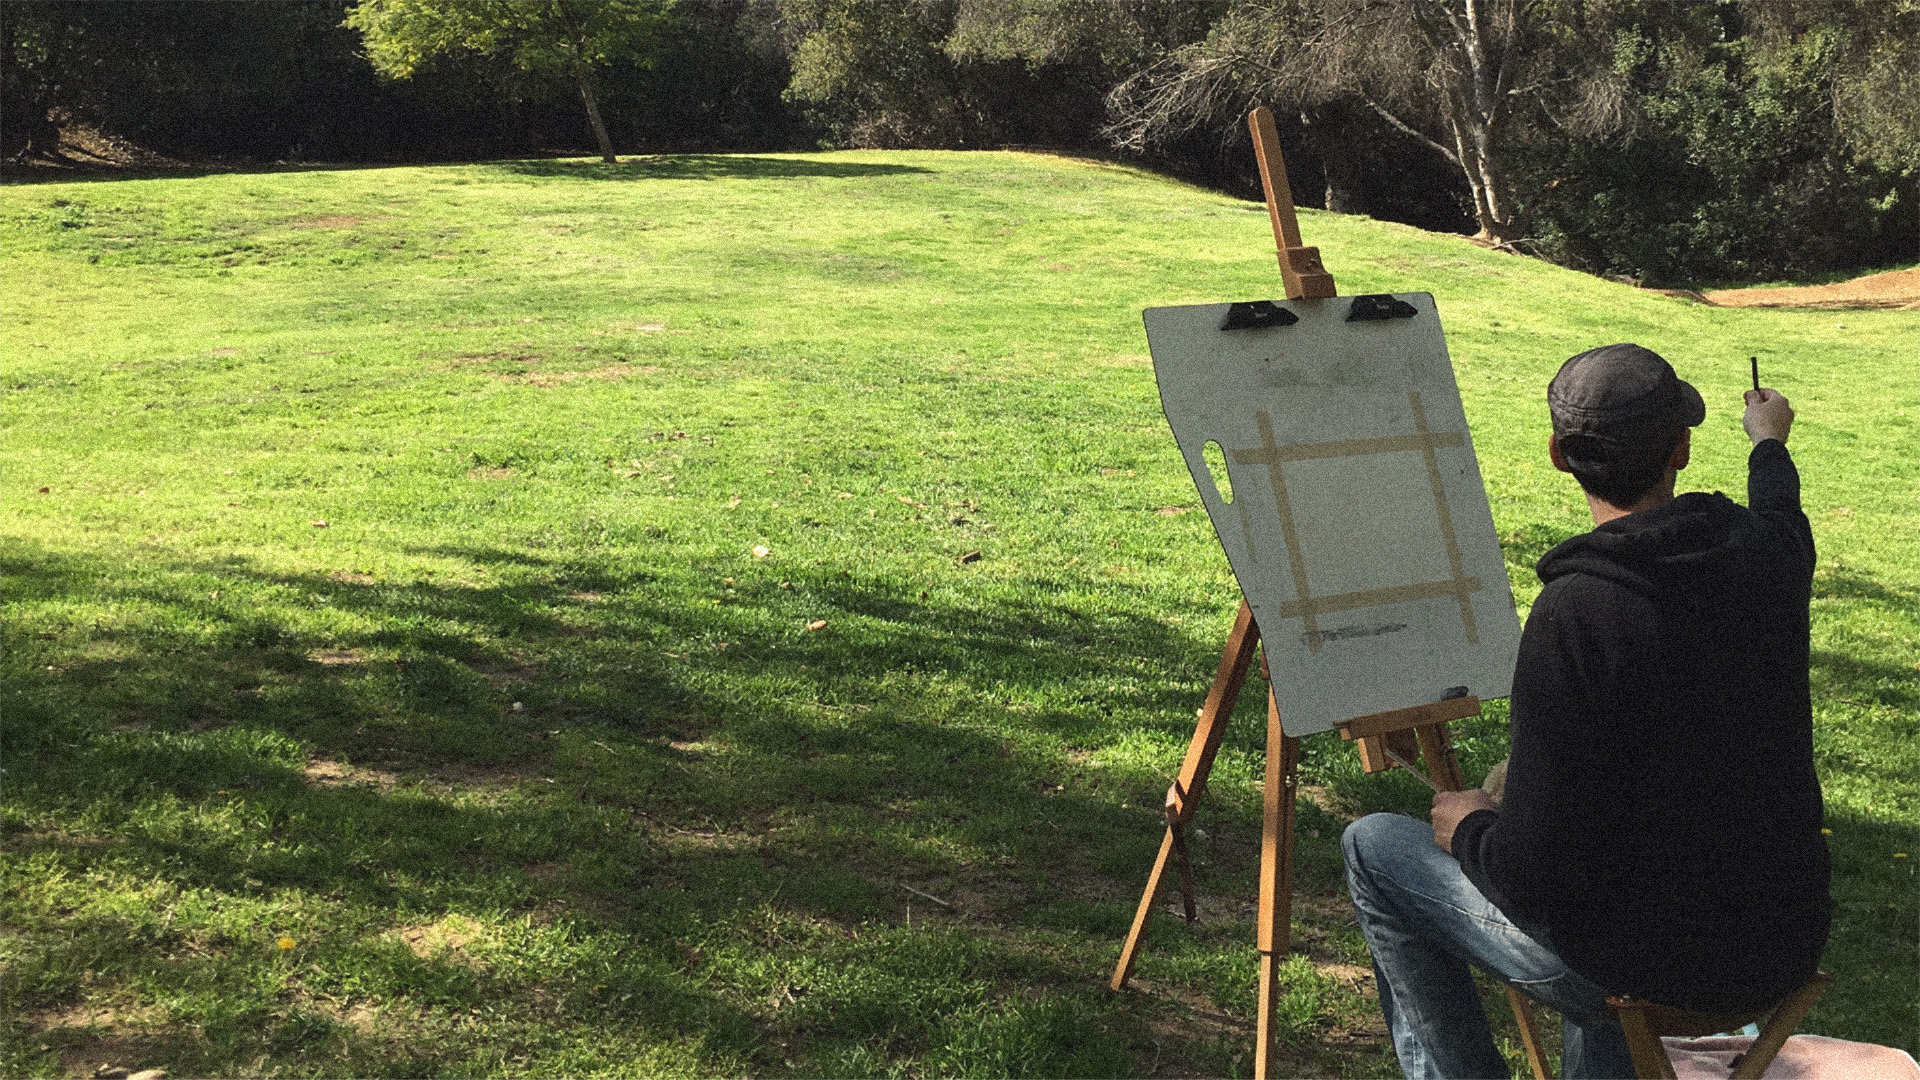 A photo of Chris Oatley sitting in the park with his easel, measuring a distant tree with his pencil for a plein air sketch.